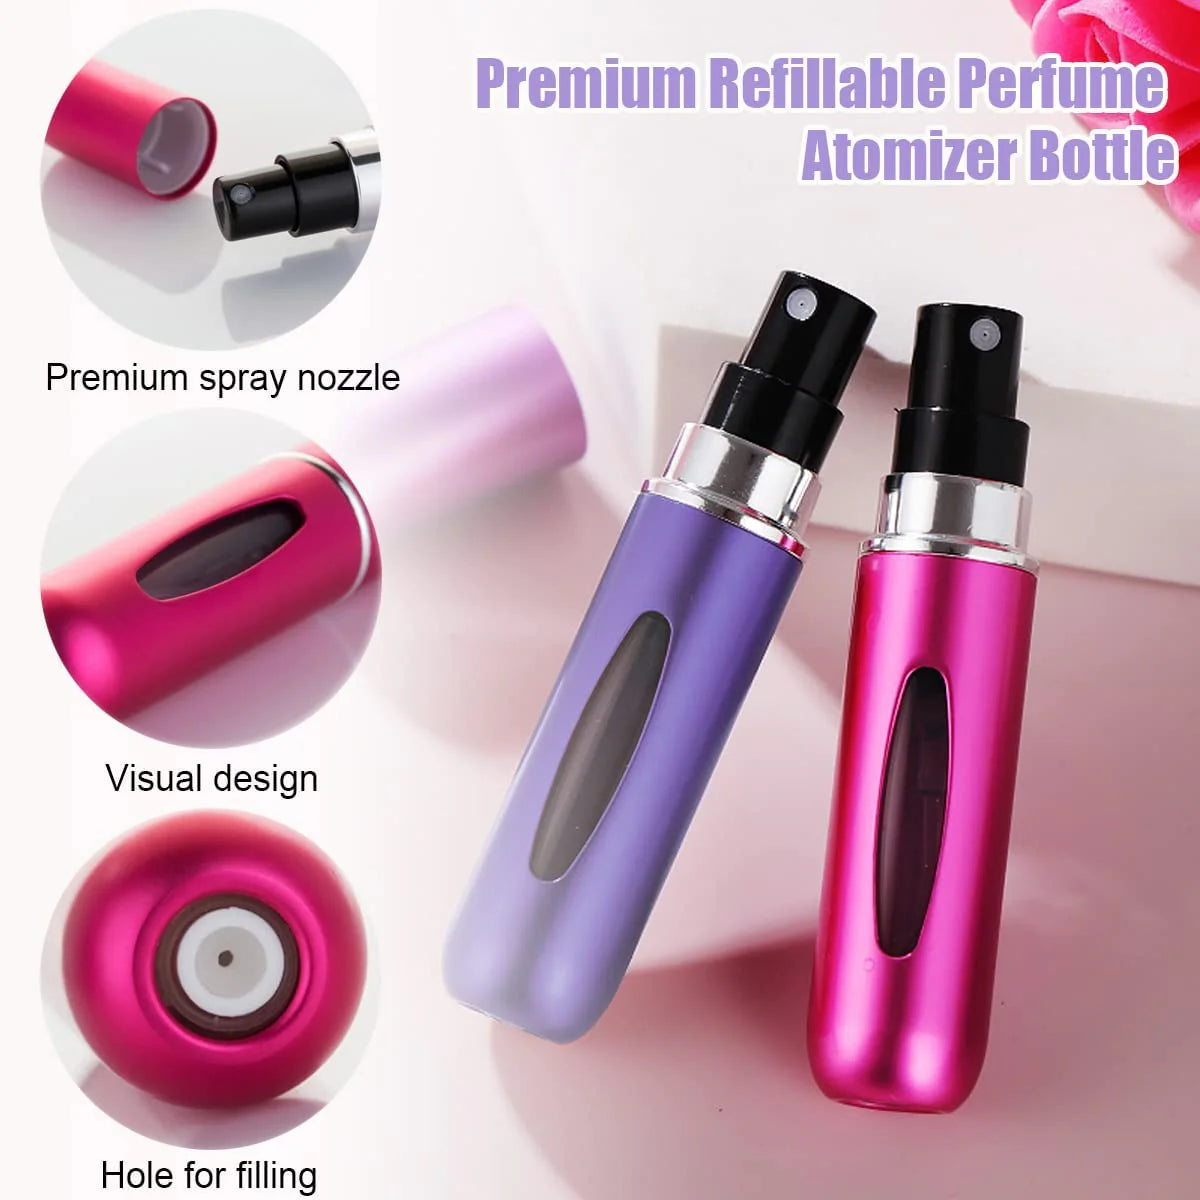 Refillable Perfume Bottle Atomizer for Travel, Yeejok Portable Easy  Refillable Perfume Spray Pump Bottle for Men and Women with 5ml Pocket Size  Perfume Containe… | Refillable perfume bottle, Refillable perfume, Perfume  container